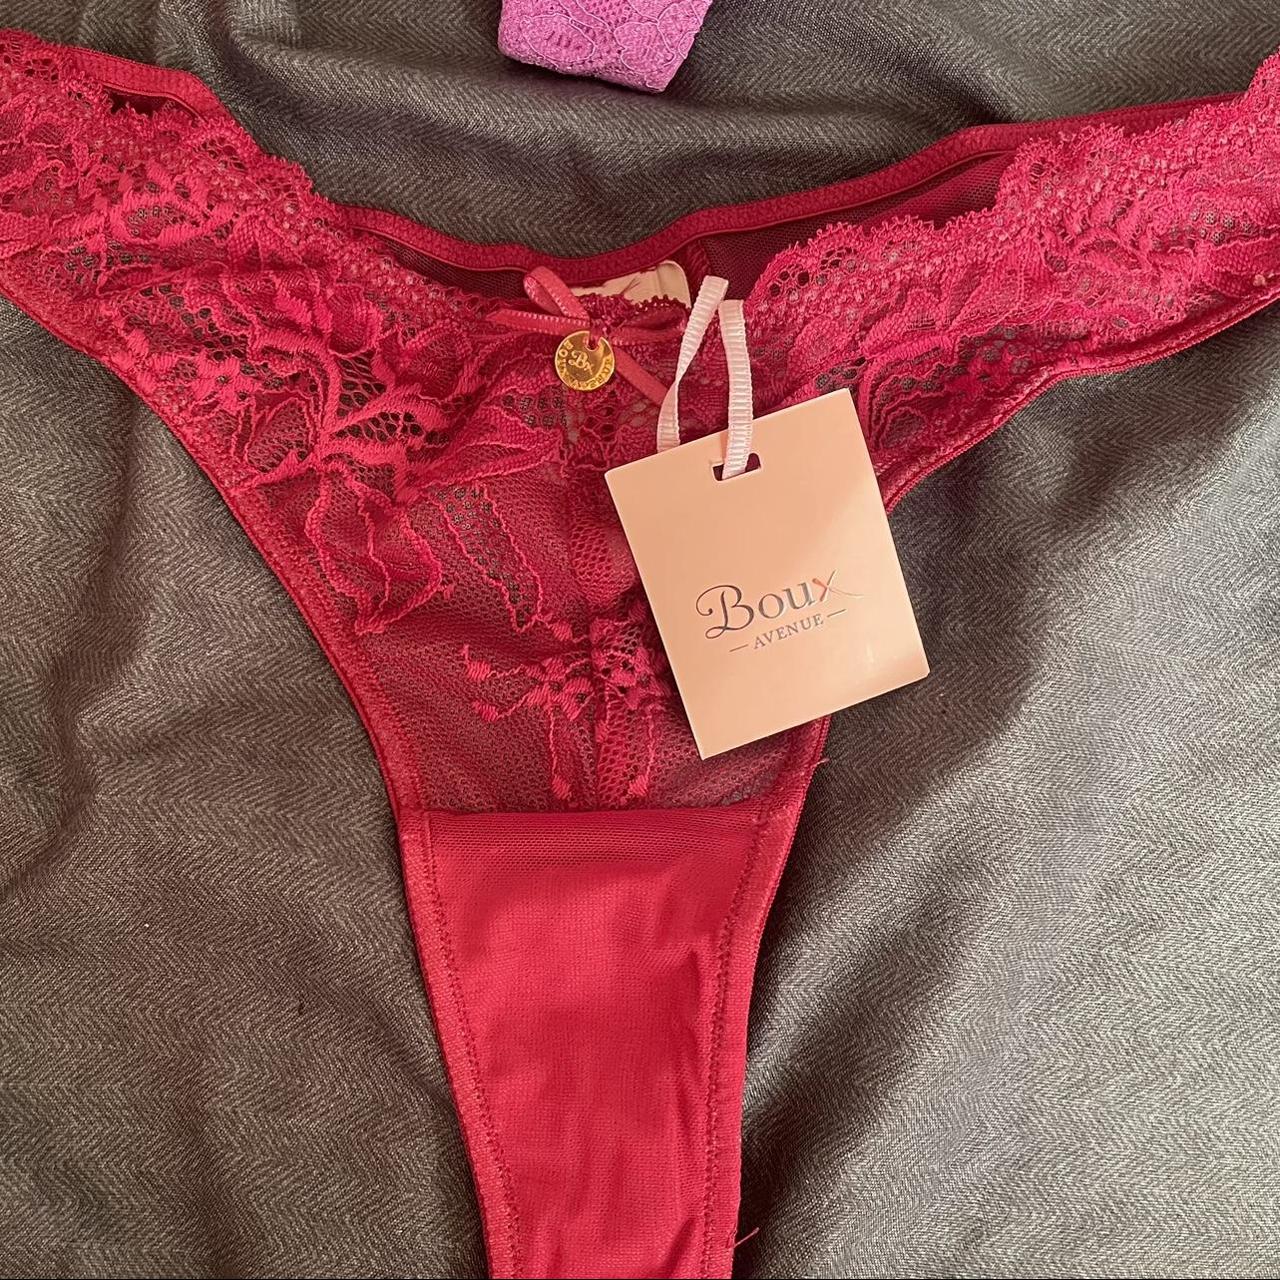 Brand new Boux Avenue hot pink lace thong. Never... - Depop